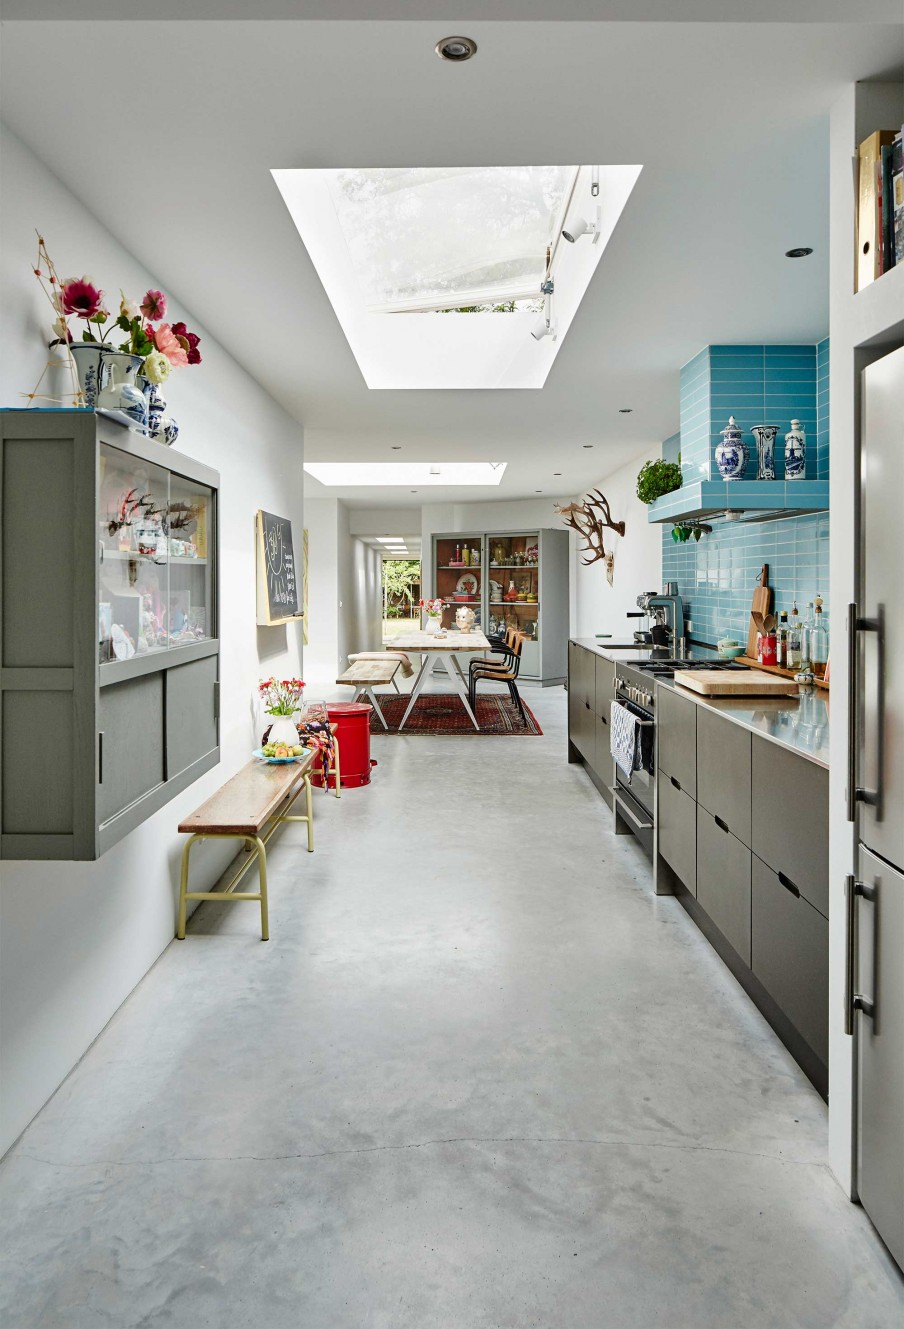 Mix of gray and blue colour kitchen design